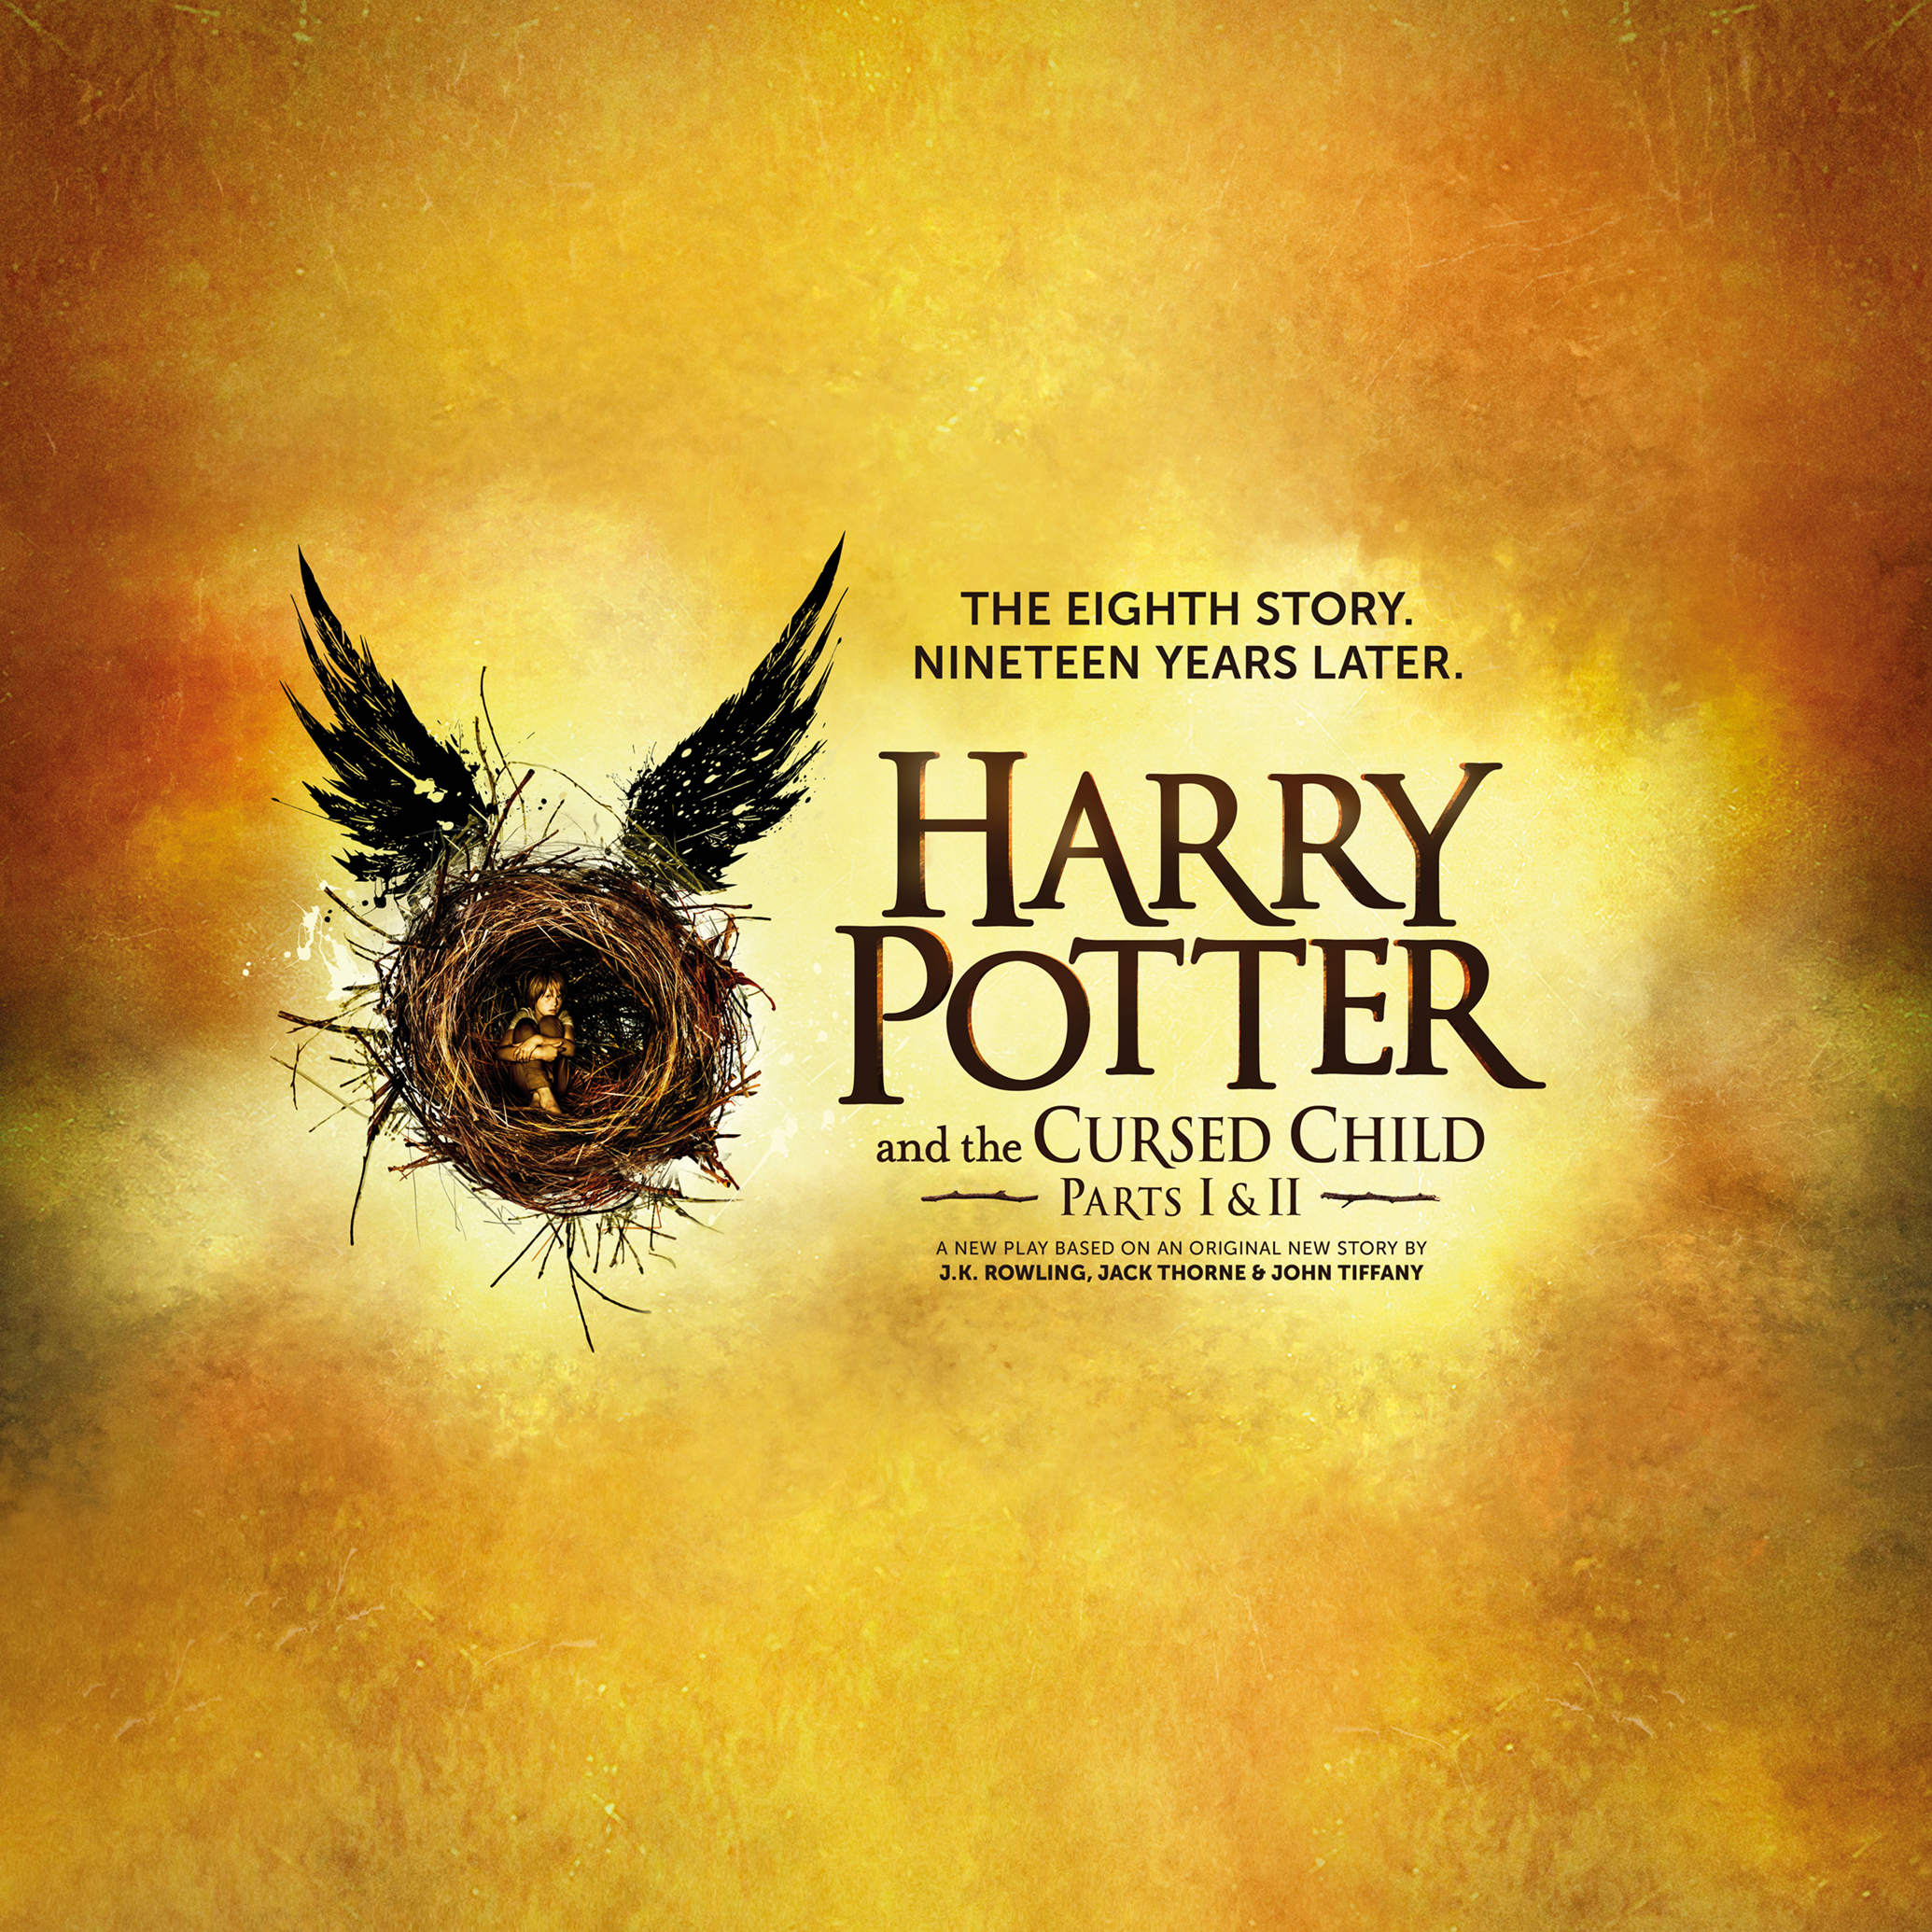 harry potter and the cursed child book info